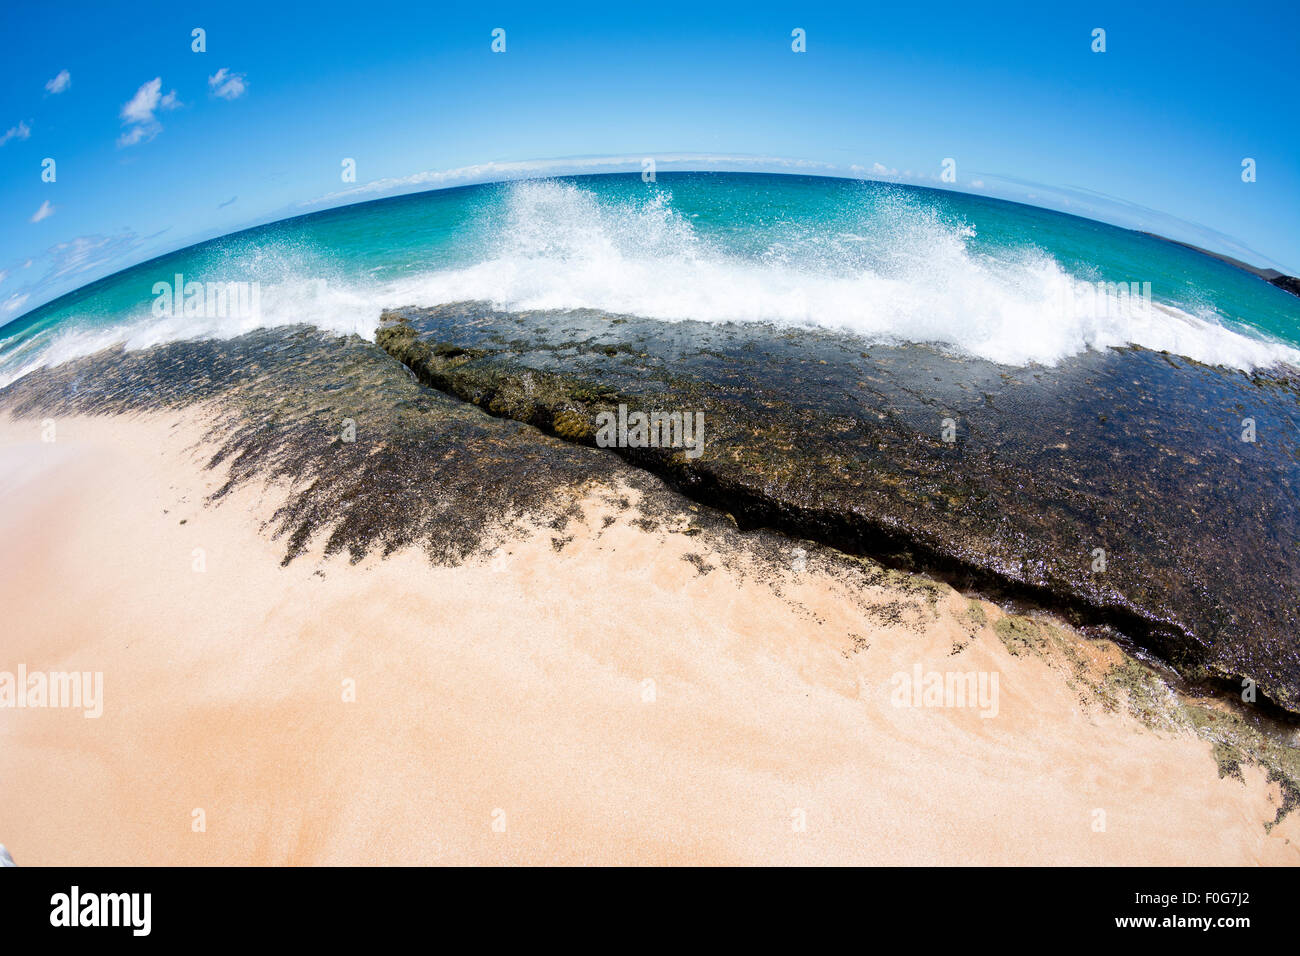 Close up of a reef on the shore of a tropical white sand beach with surf crashing into the reef Stock Photo